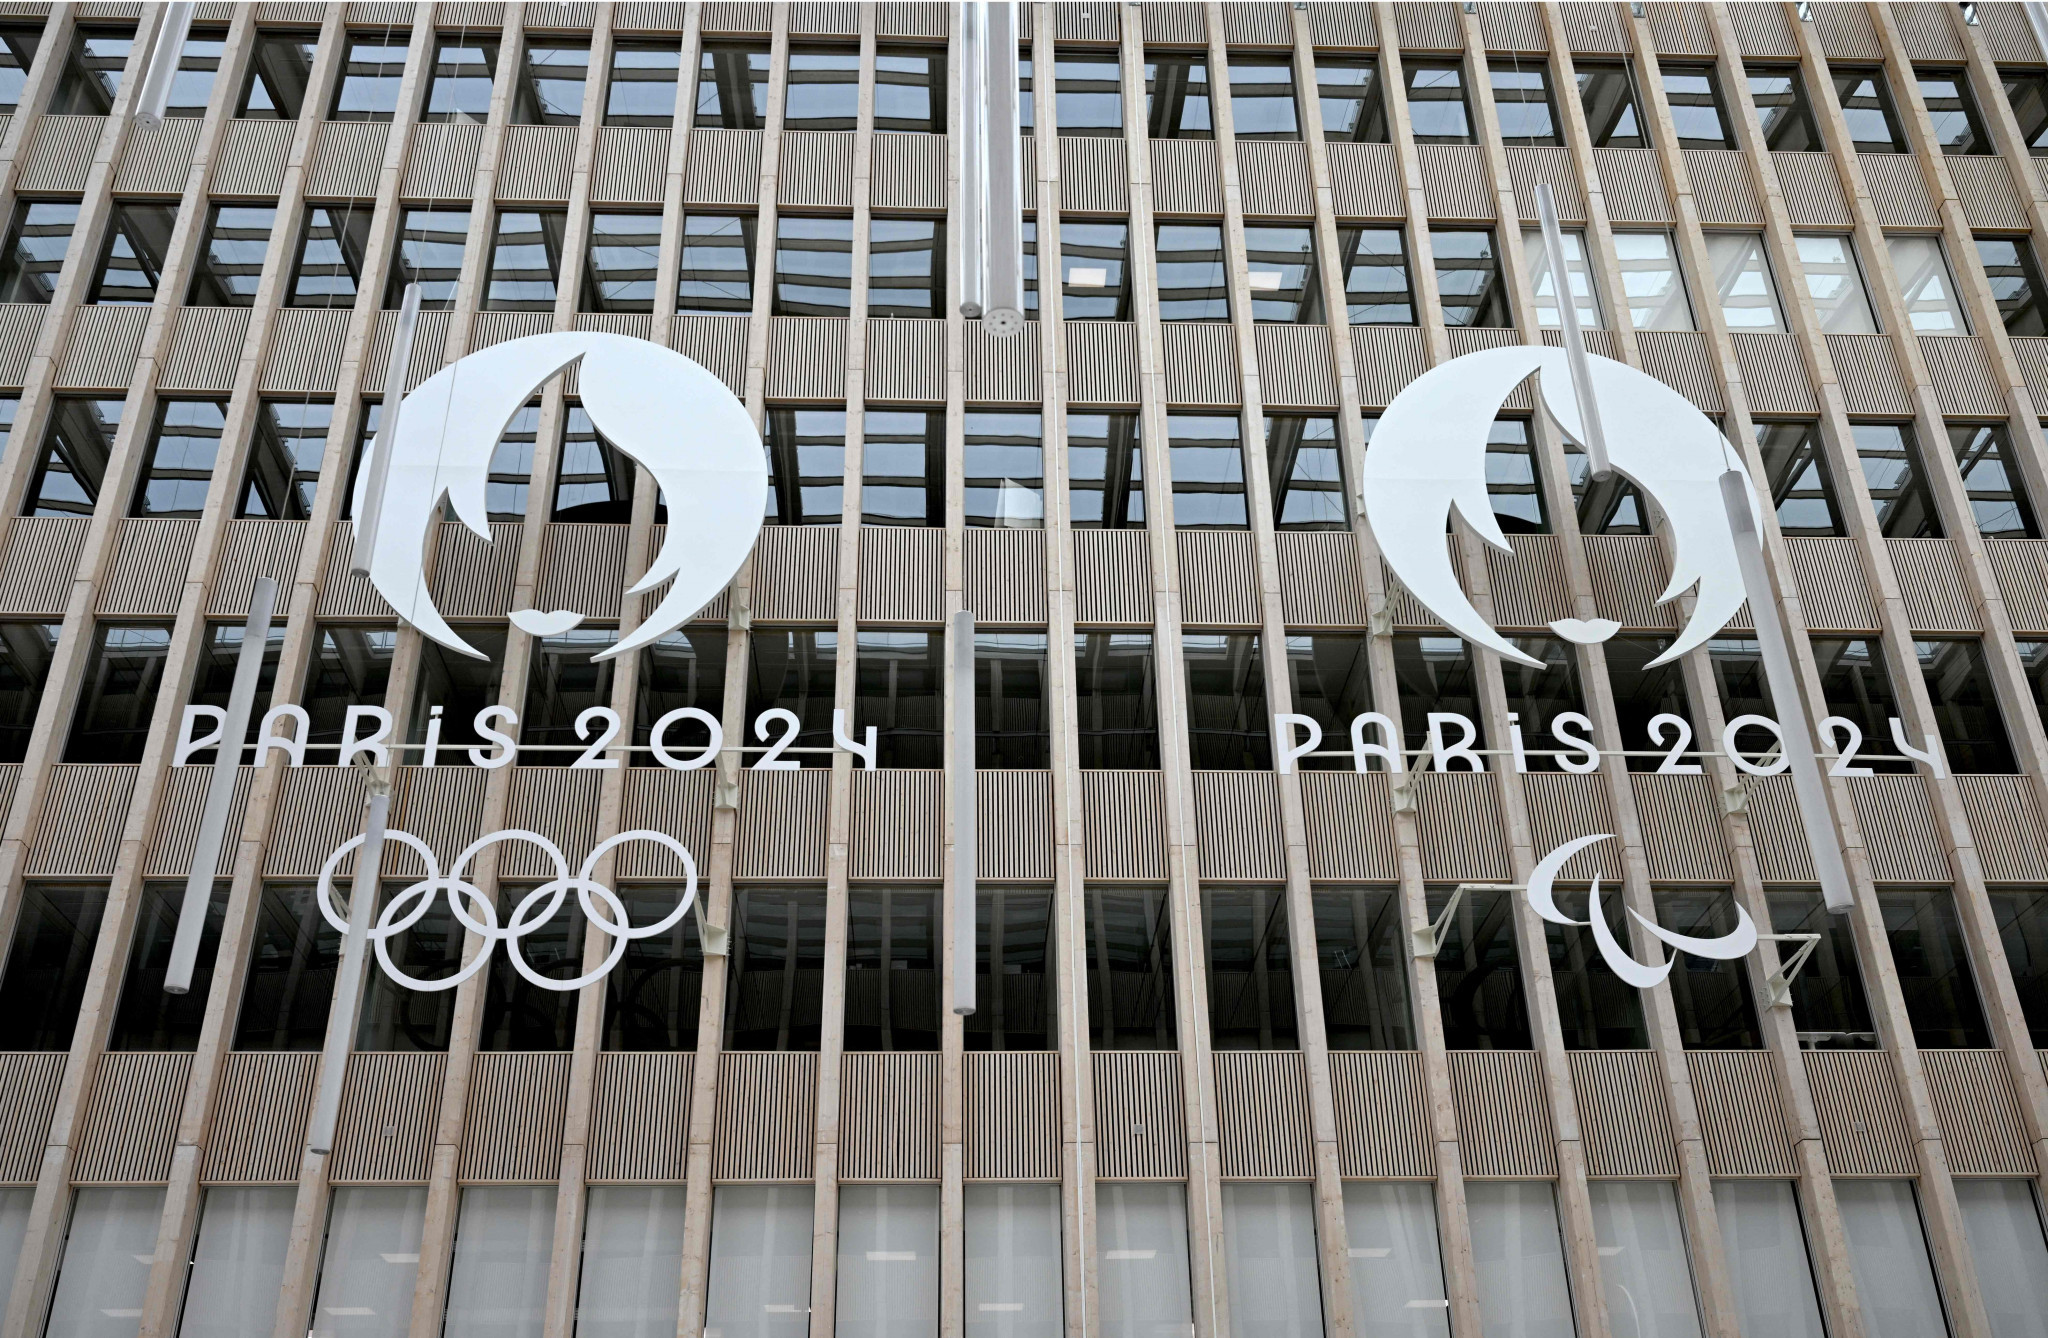 Paris is due to stage the 2024 Olympic Games from July 26 to August 11 ©Getty Images